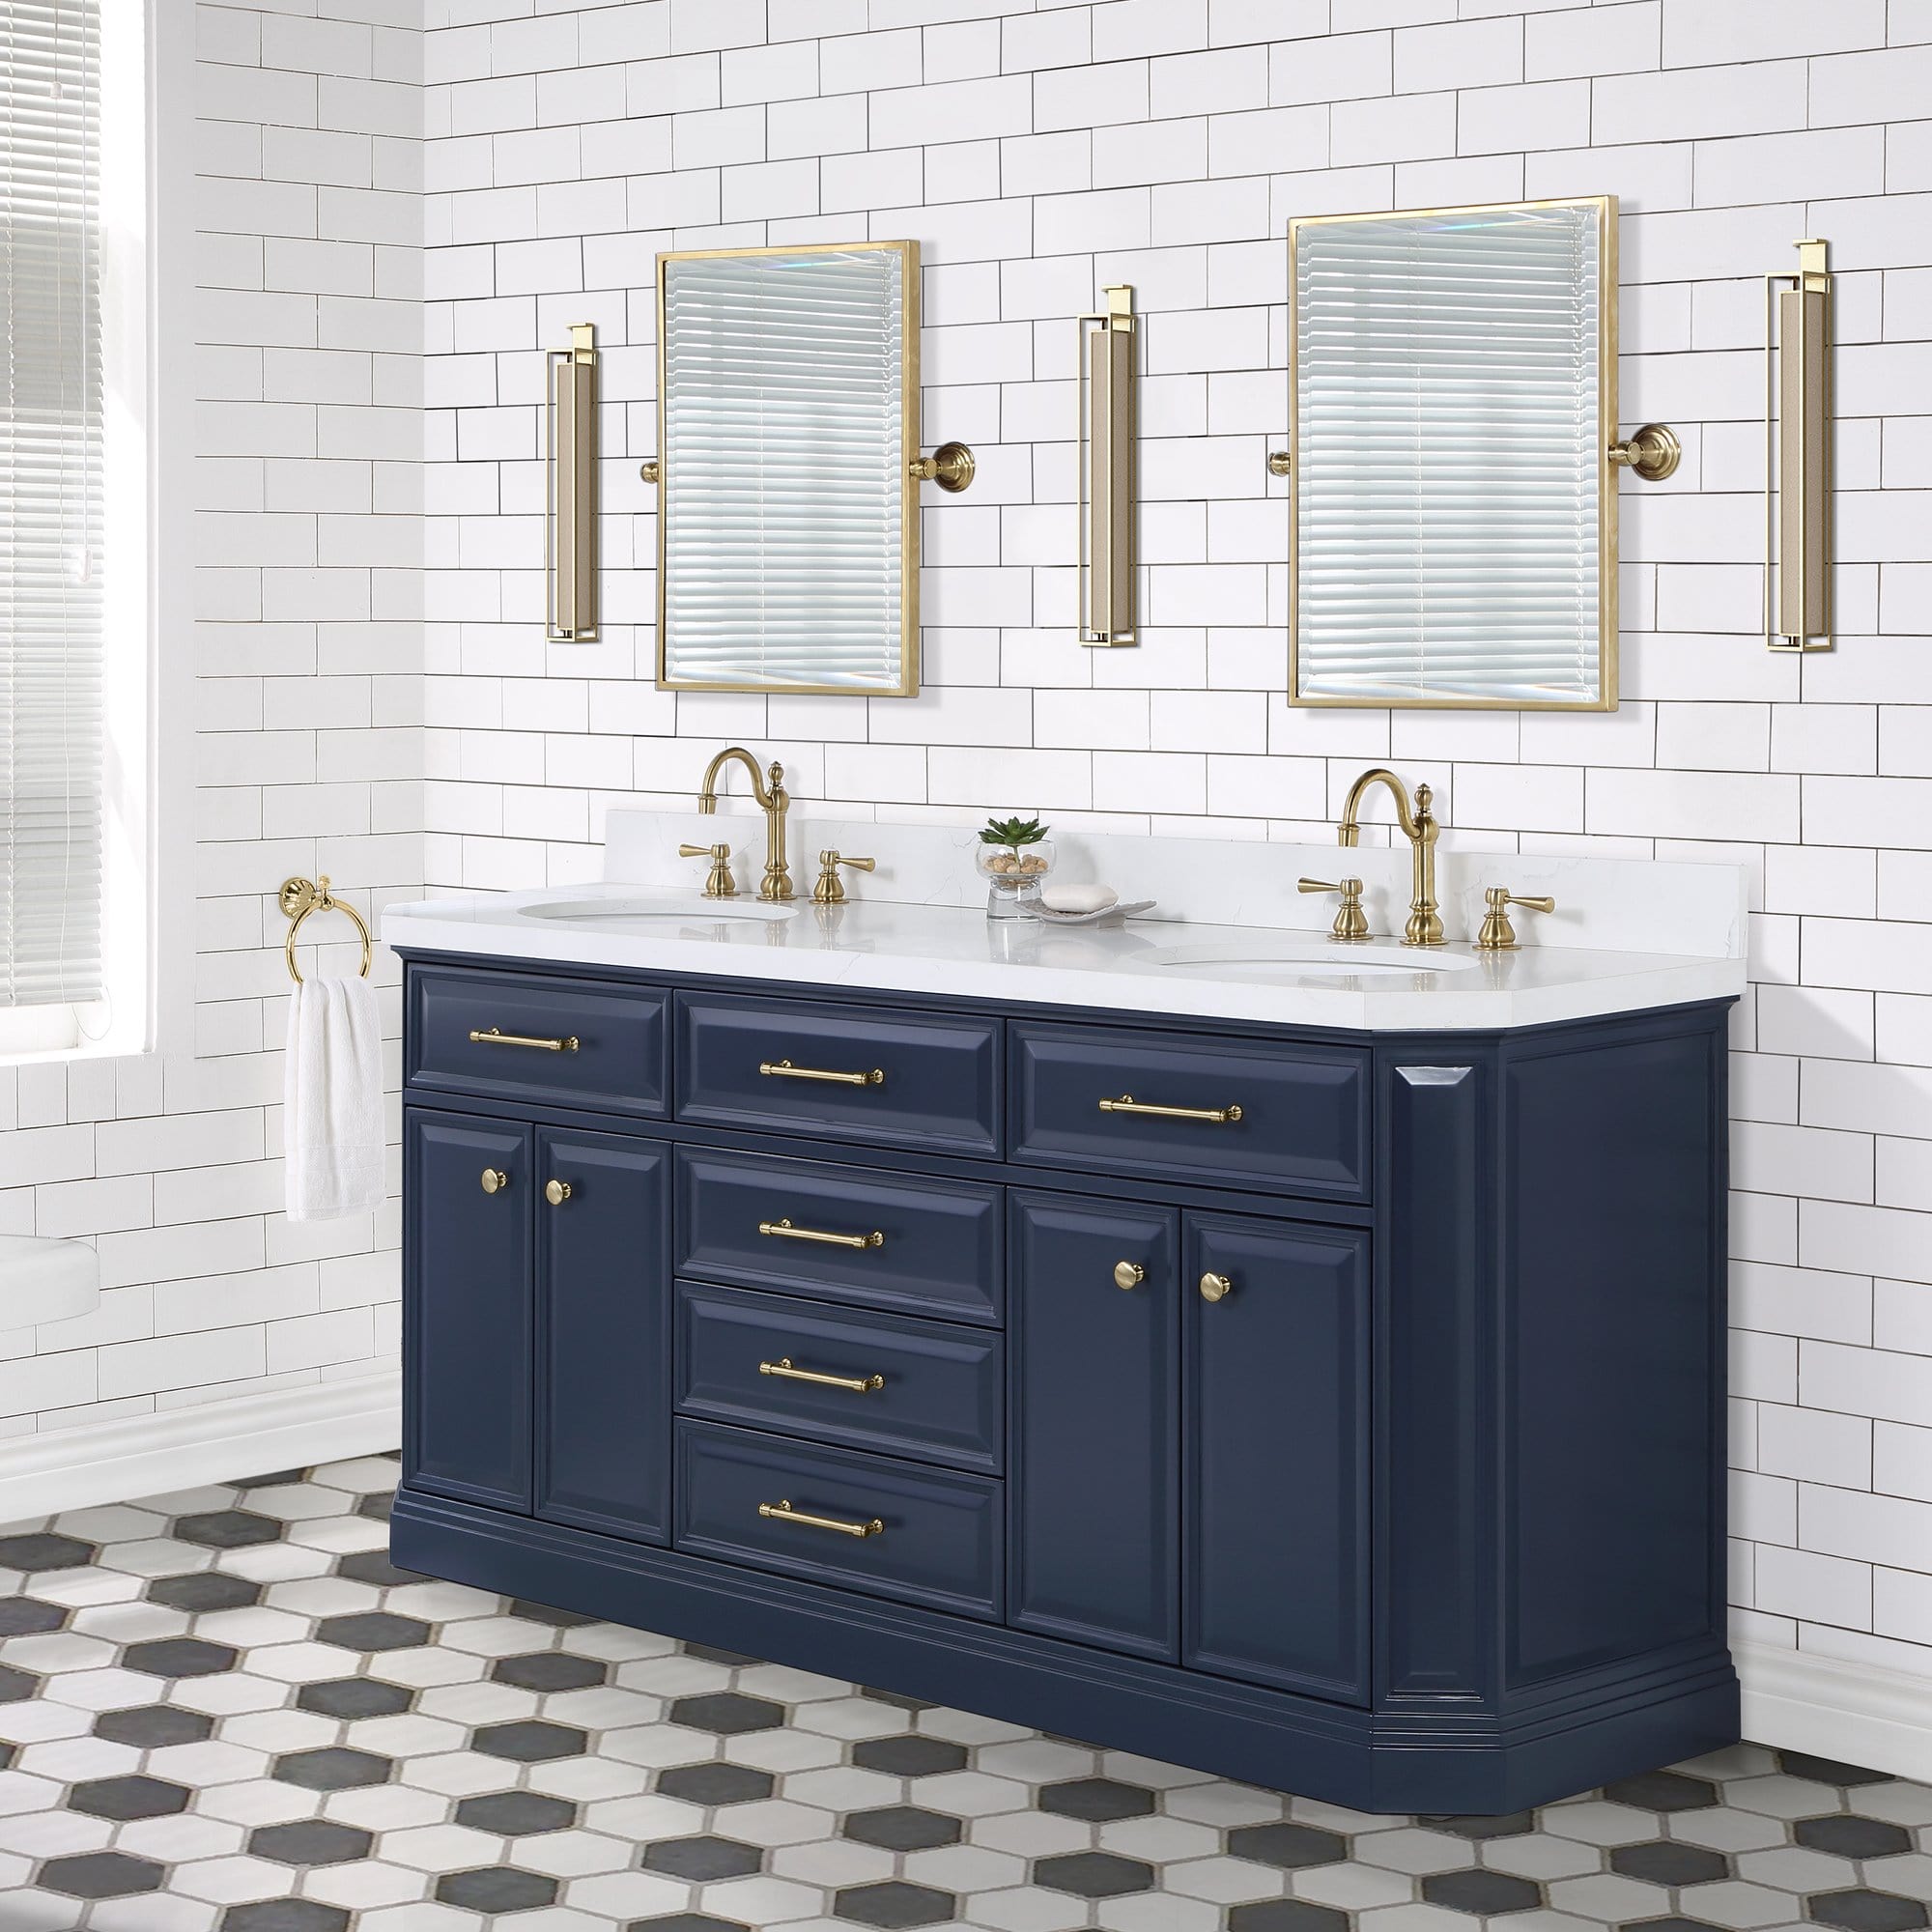 Water Creation Palace 72 In. Double Sink White Quartz Countertop Vanity in Monarch Blue with Hook Faucets and Mirrors - Molaix732030765078Bathroom vanityPA72QZ06MB-E18TL1206